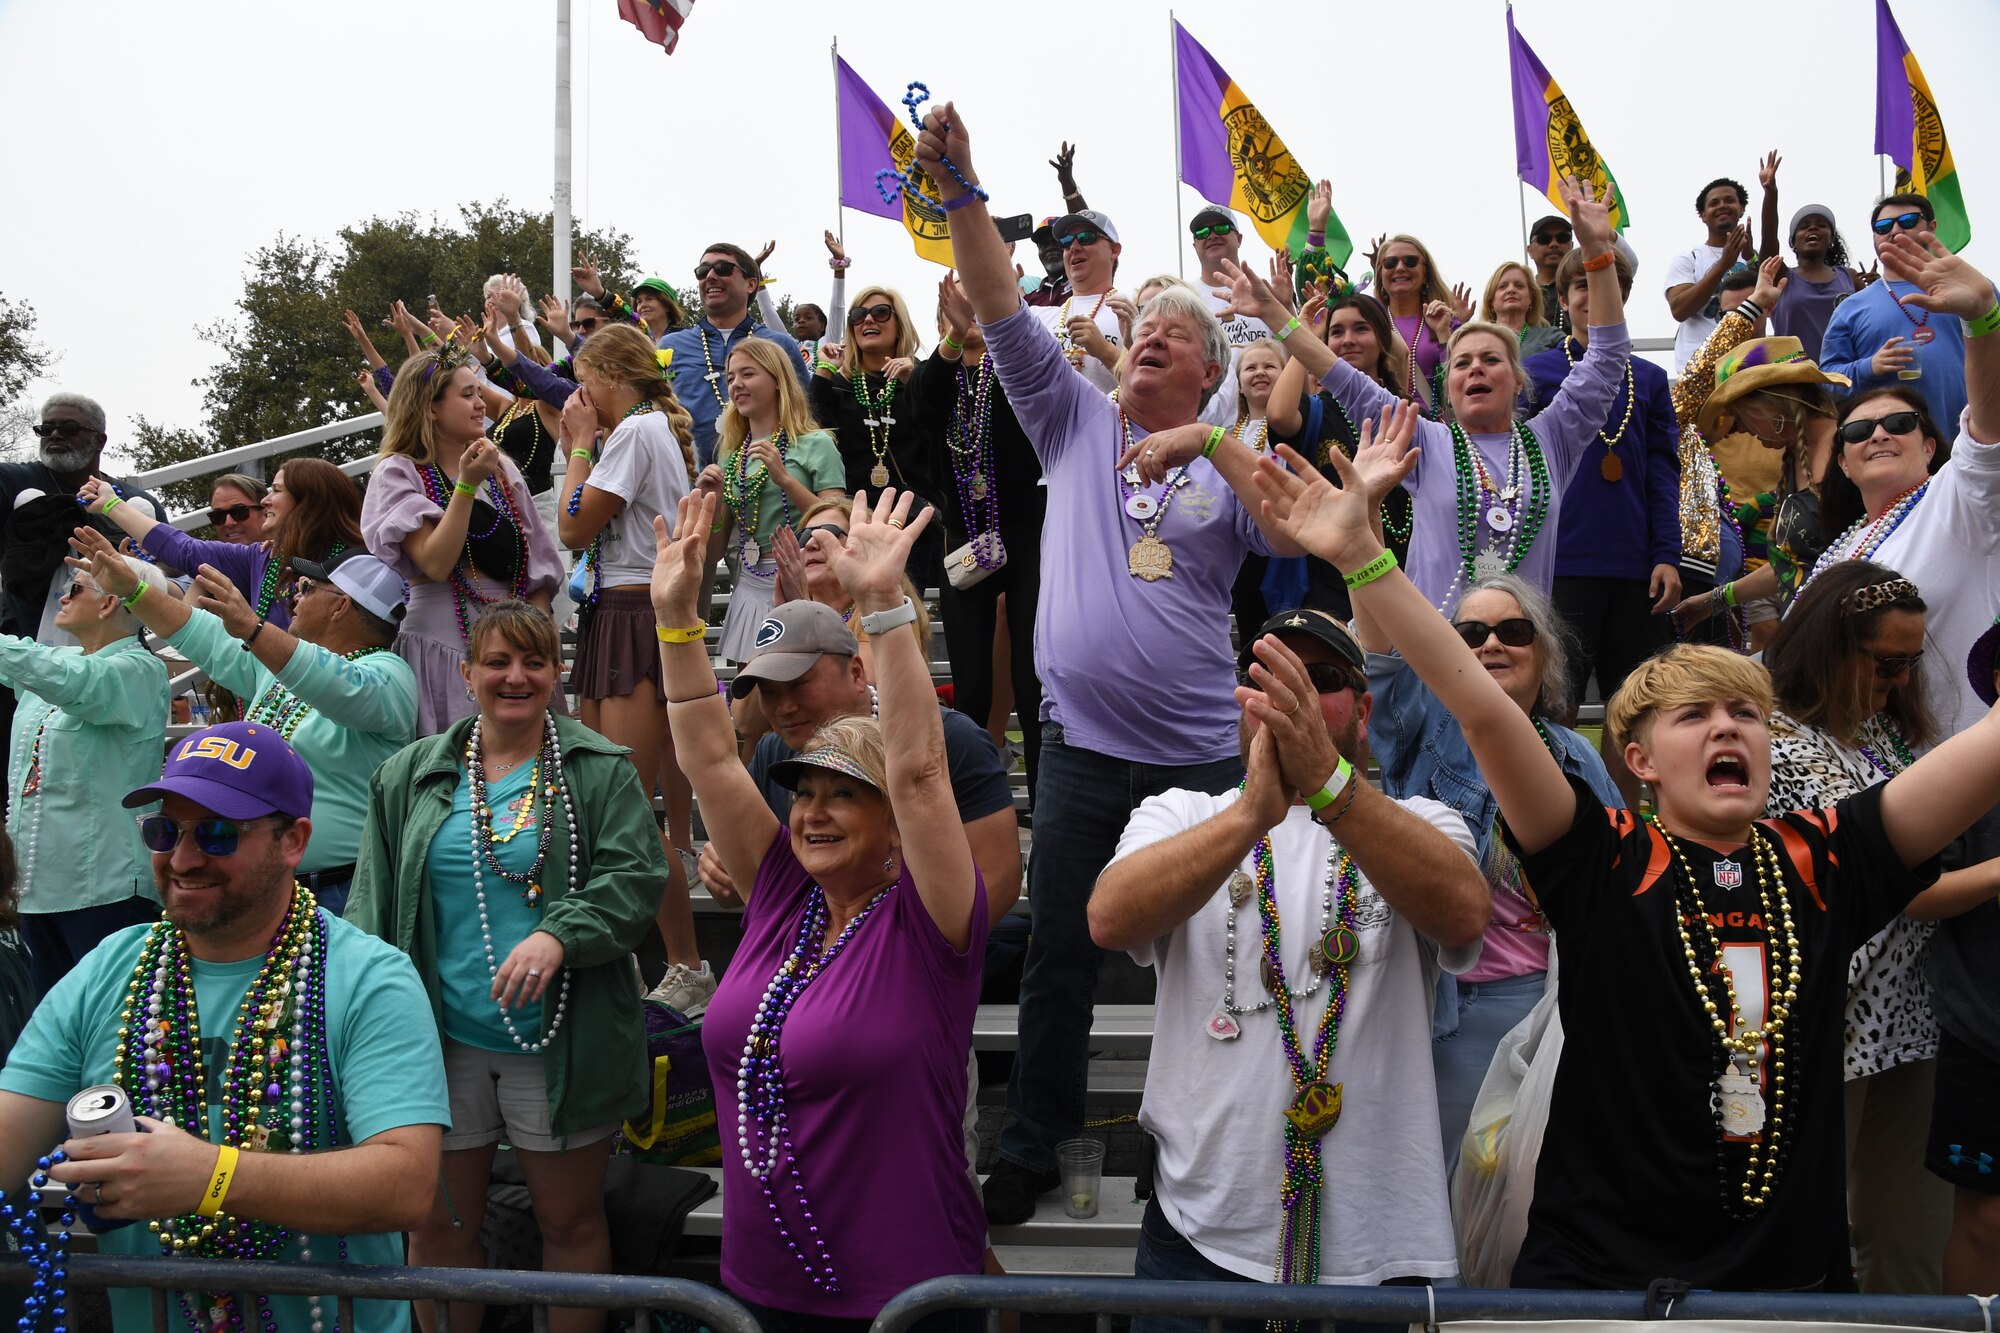 Parade attendees raise their hands and shout for bead throws from floats during the Gulf Coast Carnival Association Mardi Gras parade in Biloxi, Mississippi, Feb. 21, 2023.